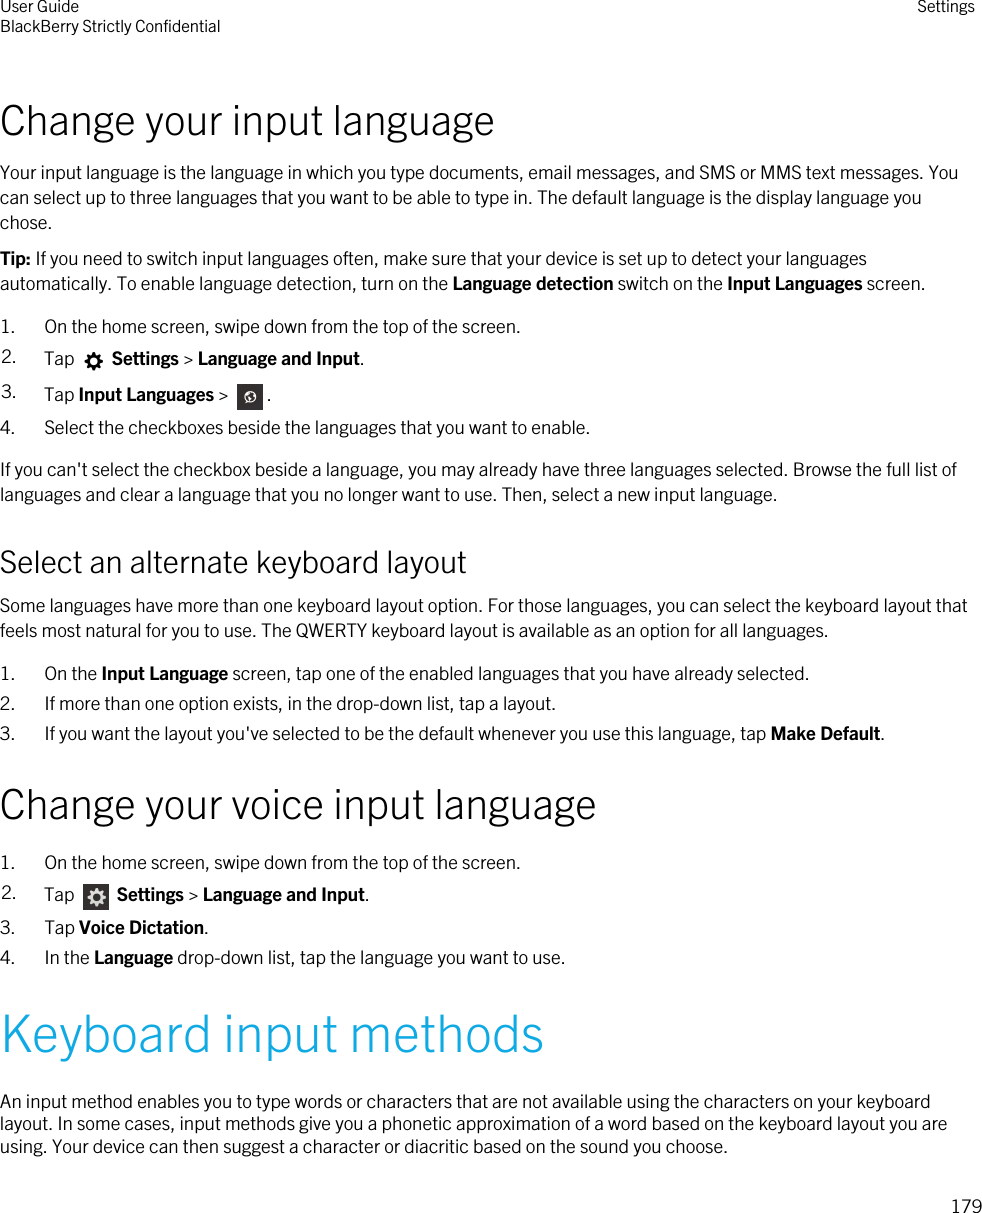 Change your input languageYour input language is the language in which you type documents, email messages, and SMS or MMS text messages. You can select up to three languages that you want to be able to type in. The default language is the display language you chose.Tip: If you need to switch input languages often, make sure that your device is set up to detect your languages automatically. To enable language detection, turn on the Language detection switch on the Input Languages screen.1. On the home screen, swipe down from the top of the screen.2. Tap   Settings &gt; Language and Input. 3. Tap Input Languages &gt;  . 4. Select the checkboxes beside the languages that you want to enable.If you can&apos;t select the checkbox beside a language, you may already have three languages selected. Browse the full list of languages and clear a language that you no longer want to use. Then, select a new input language.Select an alternate keyboard layoutSome languages have more than one keyboard layout option. For those languages, you can select the keyboard layout that feels most natural for you to use. The QWERTY keyboard layout is available as an option for all languages.1. On the Input Language screen, tap one of the enabled languages that you have already selected.2. If more than one option exists, in the drop-down list, tap a layout.3. If you want the layout you&apos;ve selected to be the default whenever you use this language, tap Make Default.Change your voice input language1. On the home screen, swipe down from the top of the screen.2. Tap   Settings &gt; Language and Input. 3. Tap Voice Dictation.4. In the Language drop-down list, tap the language you want to use.Keyboard input methodsAn input method enables you to type words or characters that are not available using the characters on your keyboard layout. In some cases, input methods give you a phonetic approximation of a word based on the keyboard layout you are using. Your device can then suggest a character or diacritic based on the sound you choose.User GuideBlackBerry Strictly Confidential Settings179